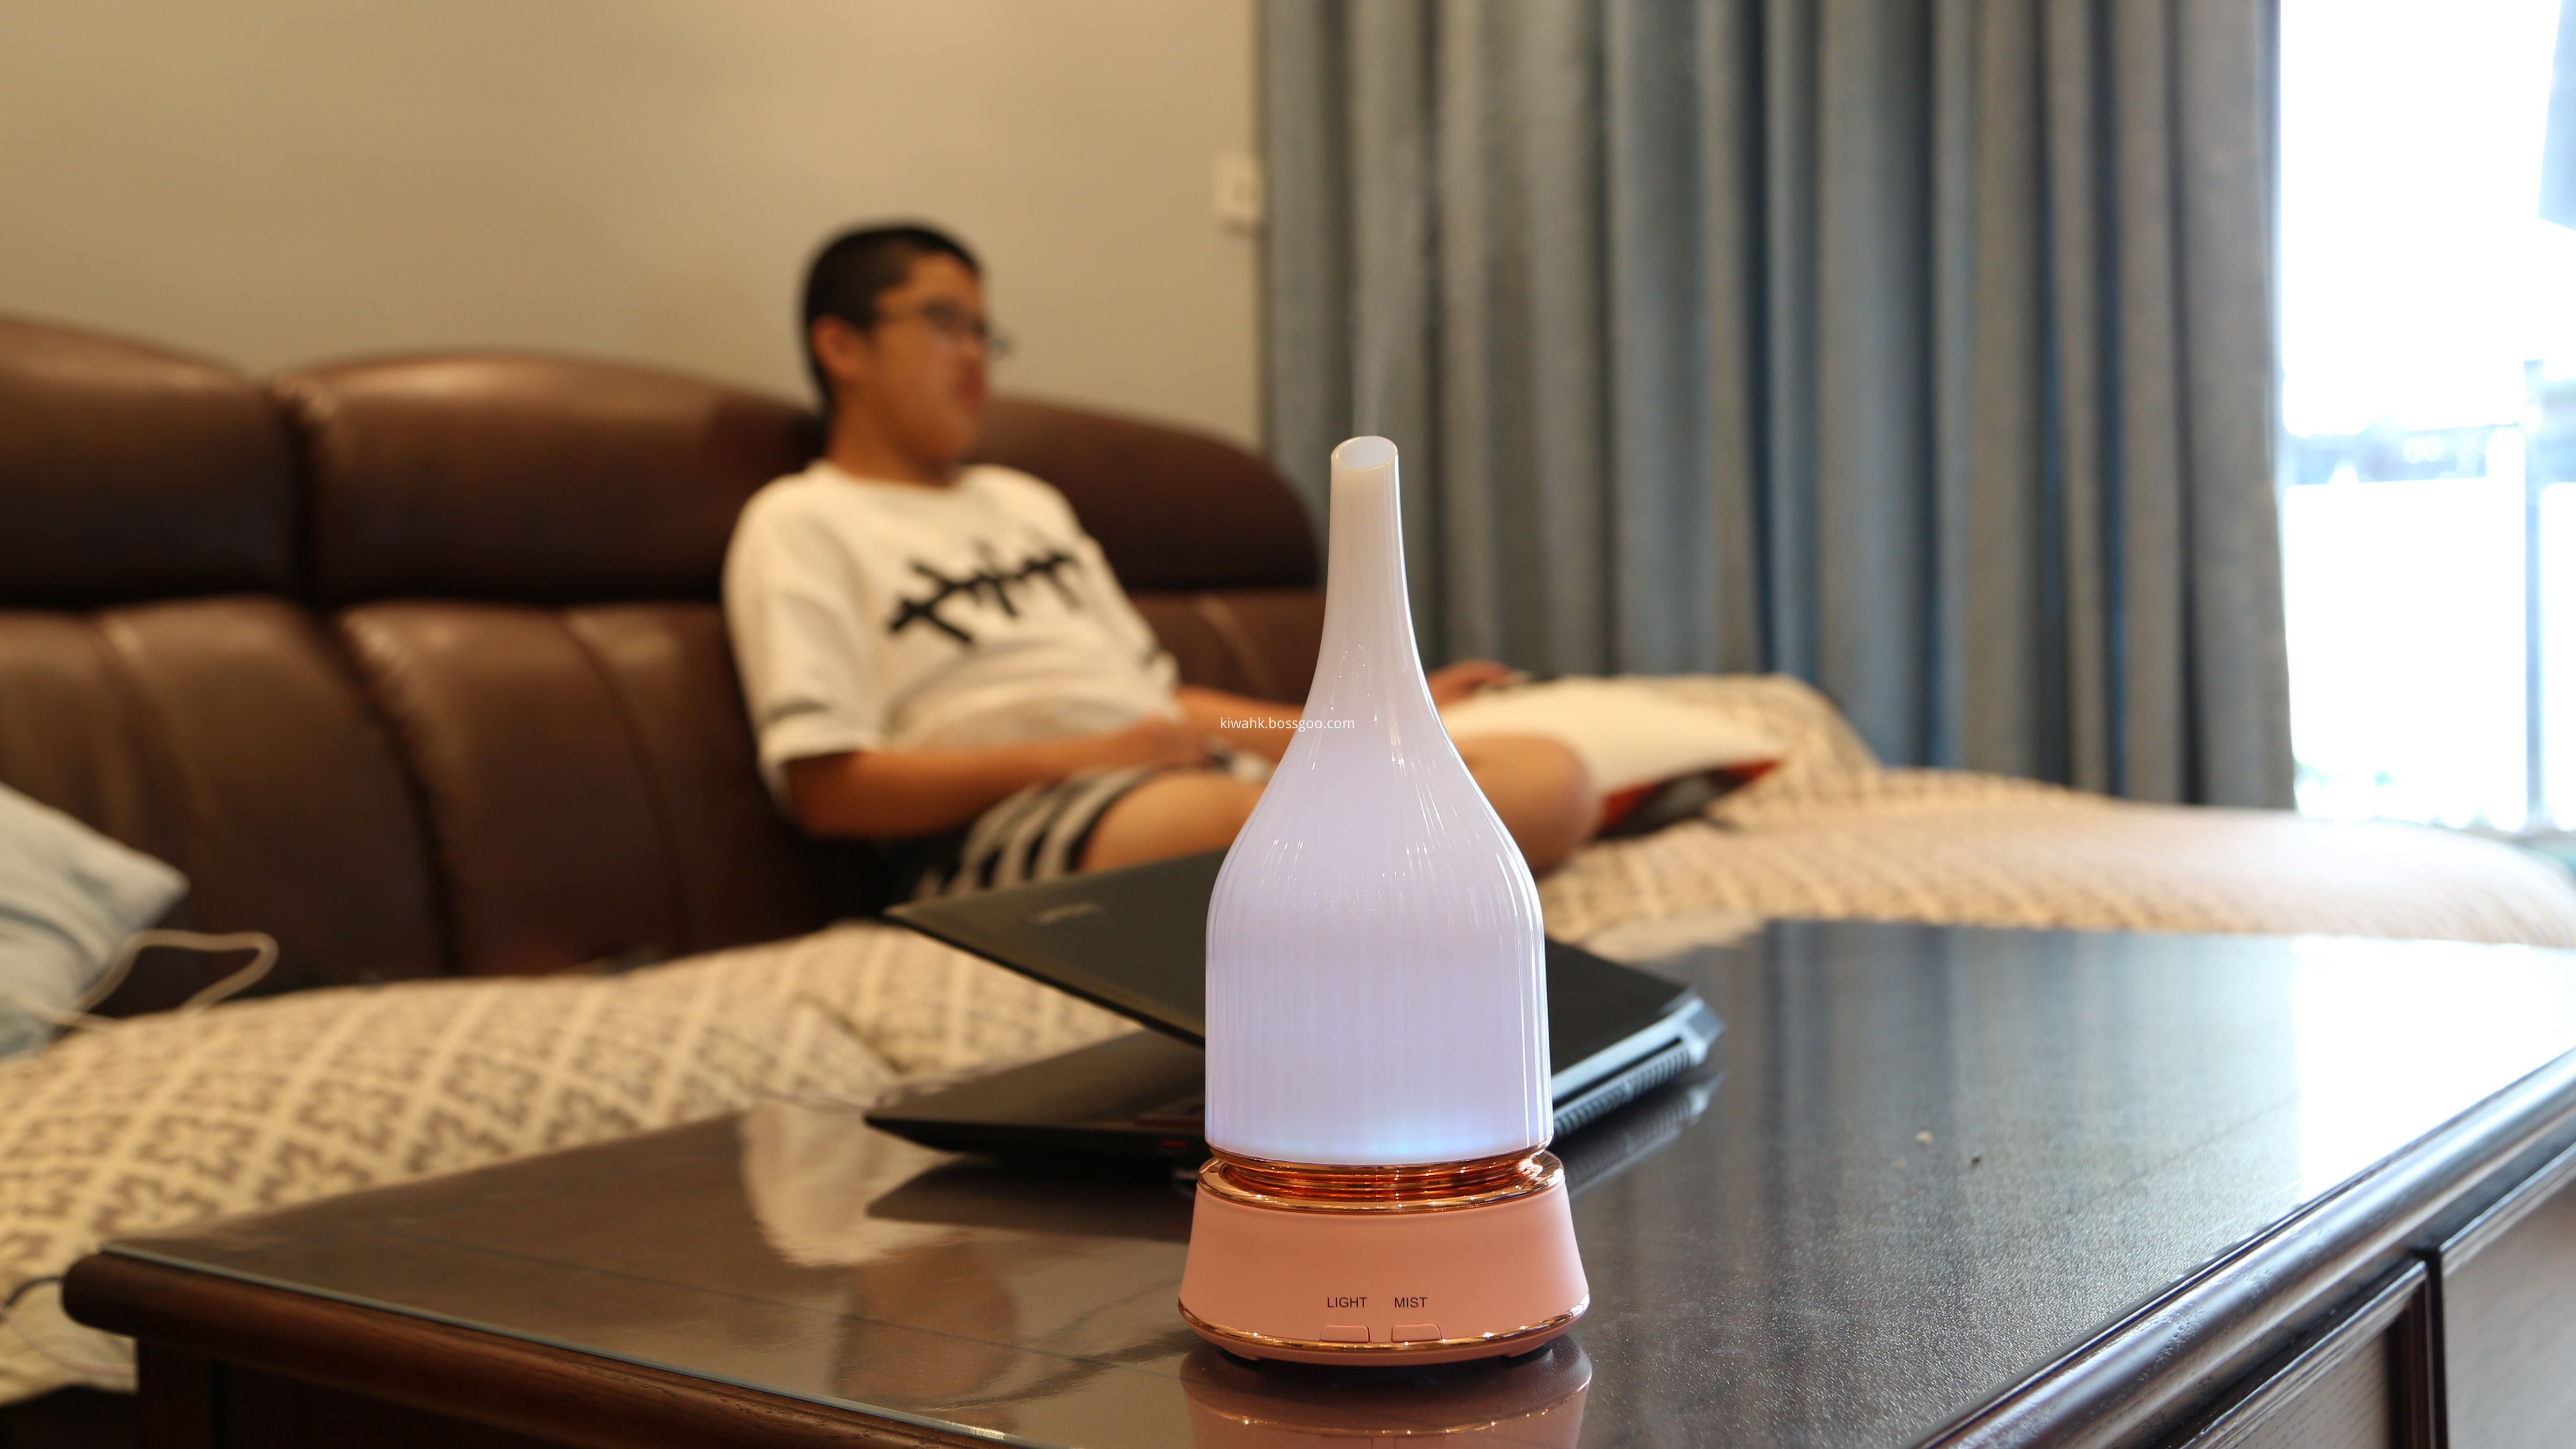 Electronic Cold Air Aroma Essential Oil Diffuser